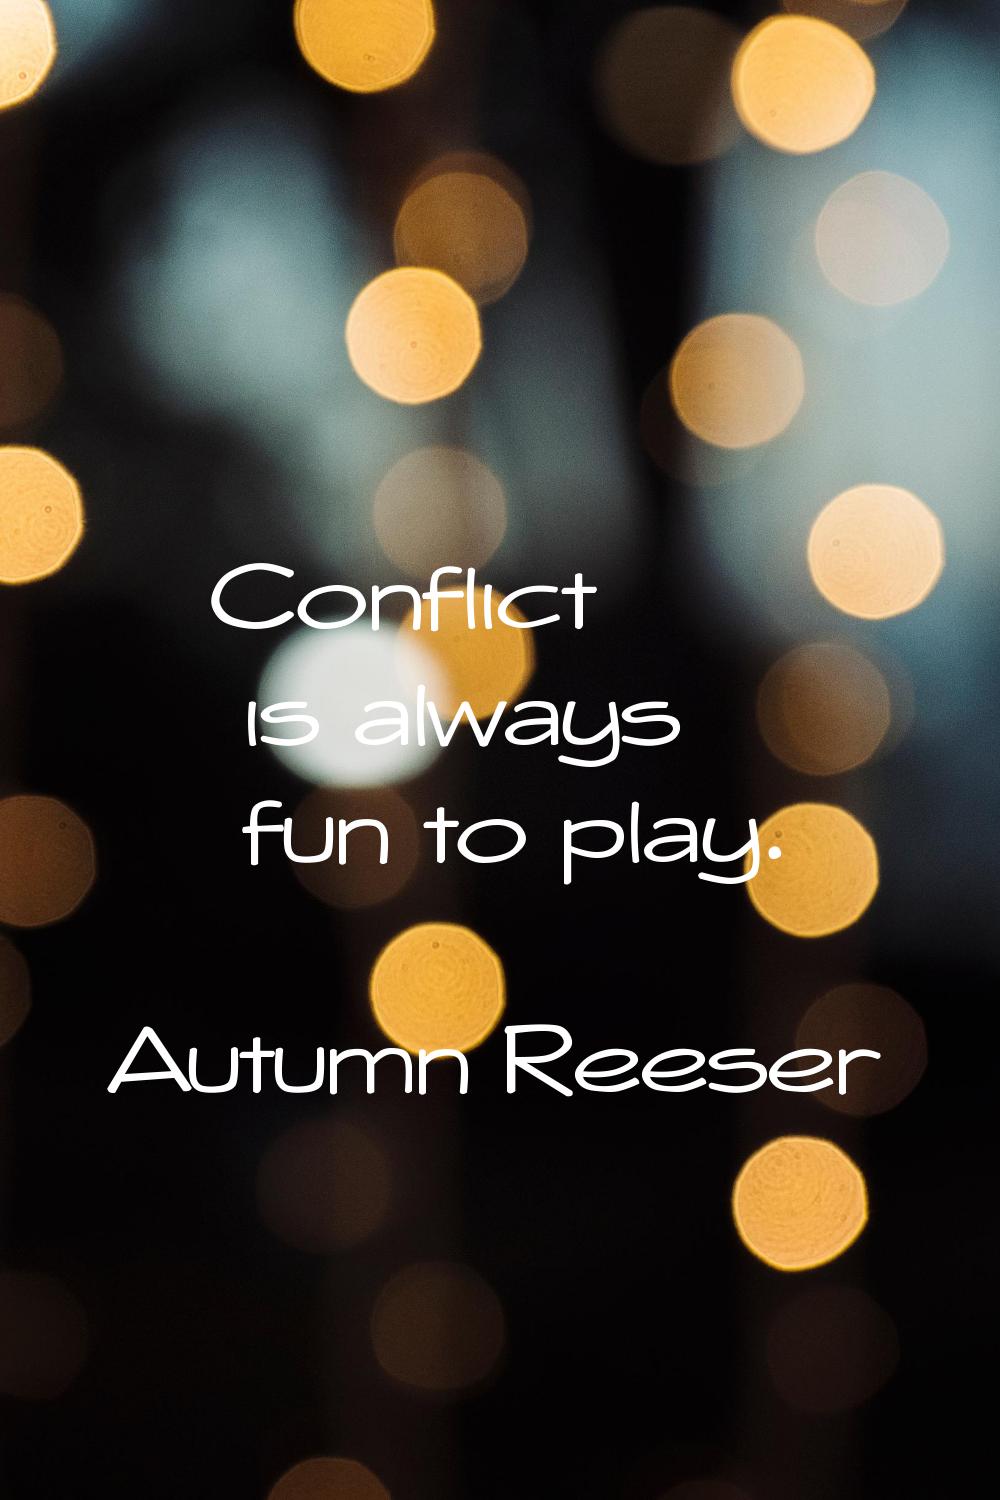 Conflict is always fun to play.